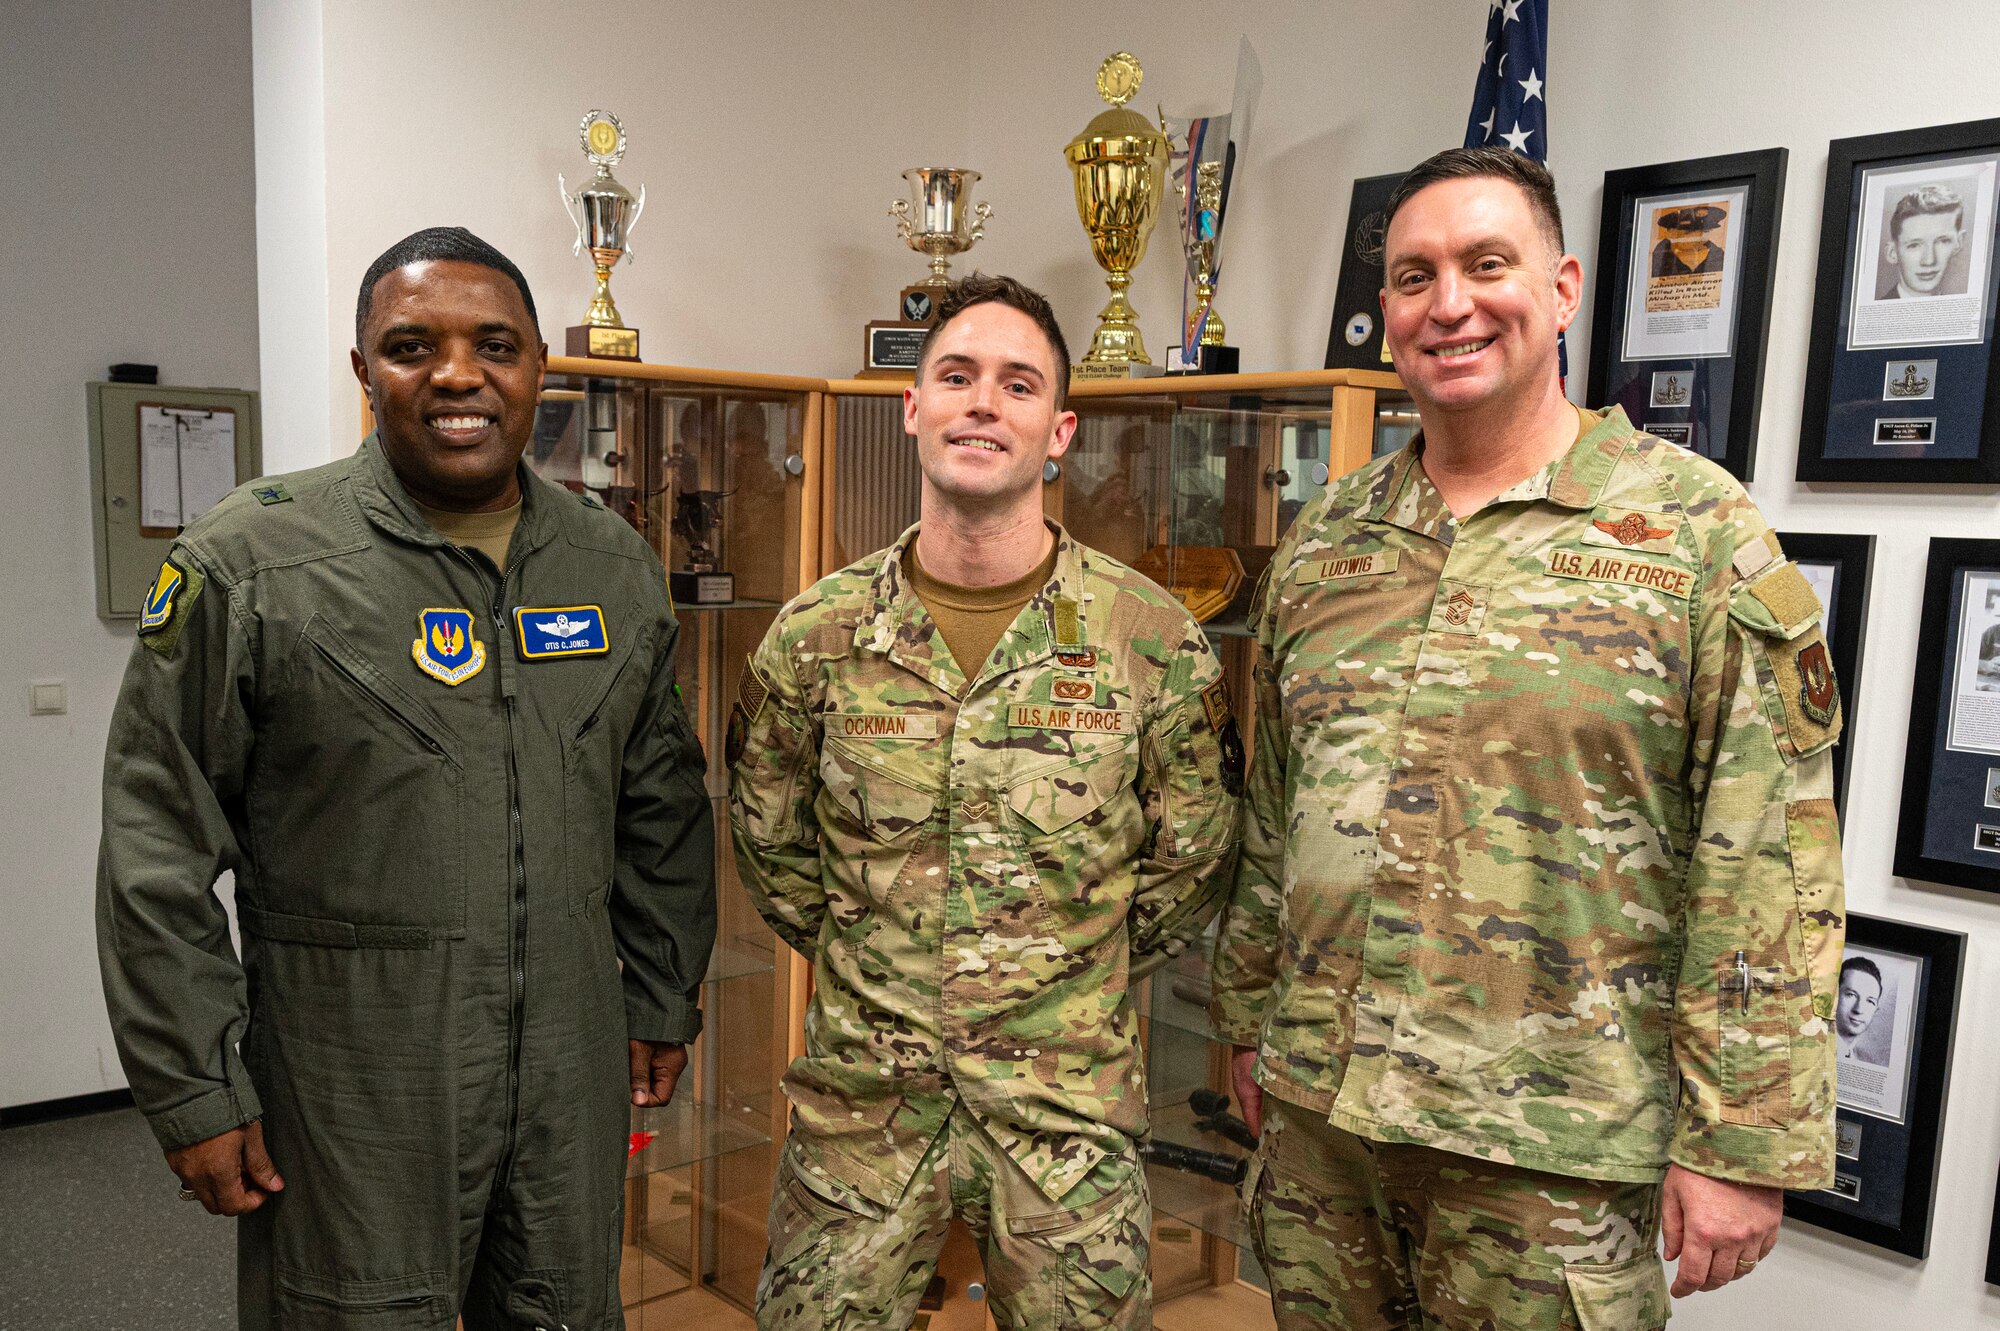 U.S. Air Force Airman 1st Class Kelsey Ockman, center, 786th Civil Engineer Squadron Explosive Ordnance Disposal apprentice, poses for a photo with Brig. Gen. Otis C. Jones, 86th Airlift Wing commander and Chief Master Sgt. Louis J. Ludwig, 86th AW command chief, at Ramstein Air Base, Germany, Jan. 30, 2024. Ockman earned the title of Airlifter of the Week because of his achievements including servicing Unit Type Code kits worth approximately $6.3 million and earning the 786th CES 3rd Quarter Hard Charger award. (U.S. Air Force photo by Senior Airman Thomas Karol)